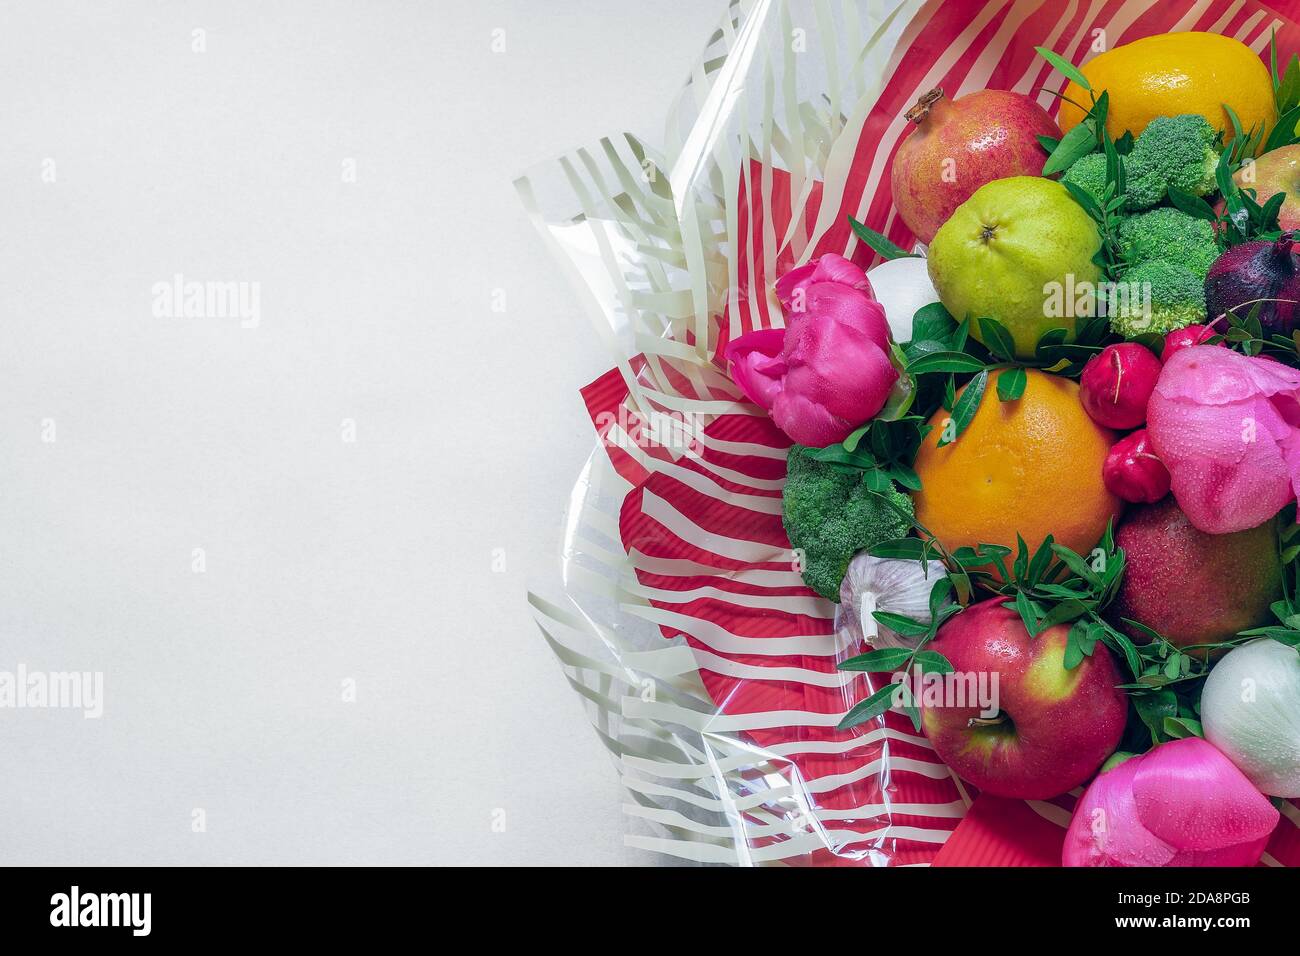 The arrangement of fruit, vegetables, flowers and green leaves surrounded by ornate red and white translucent striped paper on a white background Stock Photo